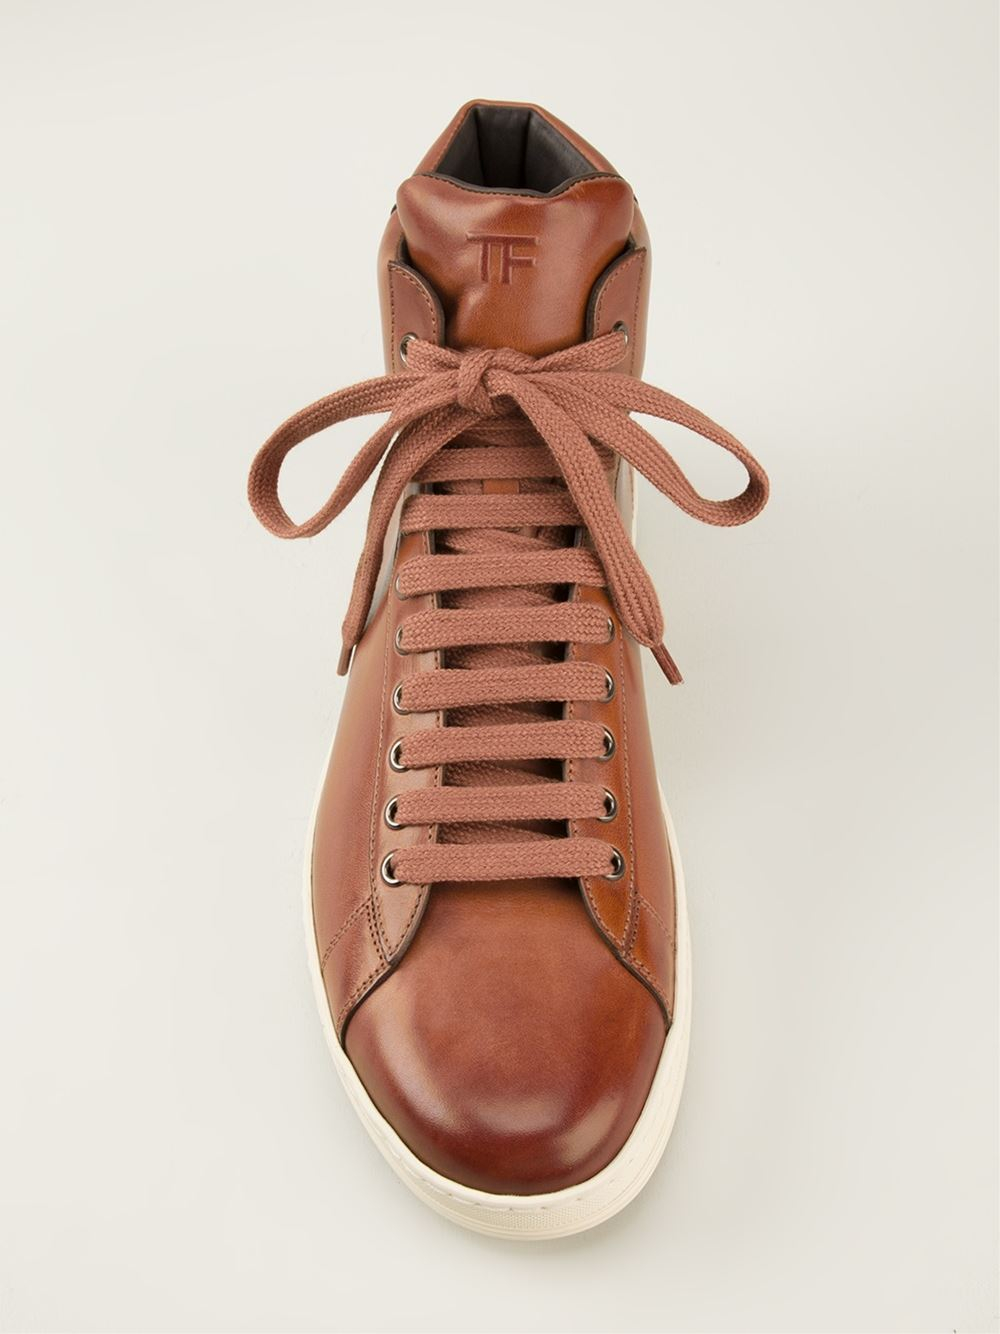 Tom Ford Russel Hitop Sneakers in Brown for Men - Lyst